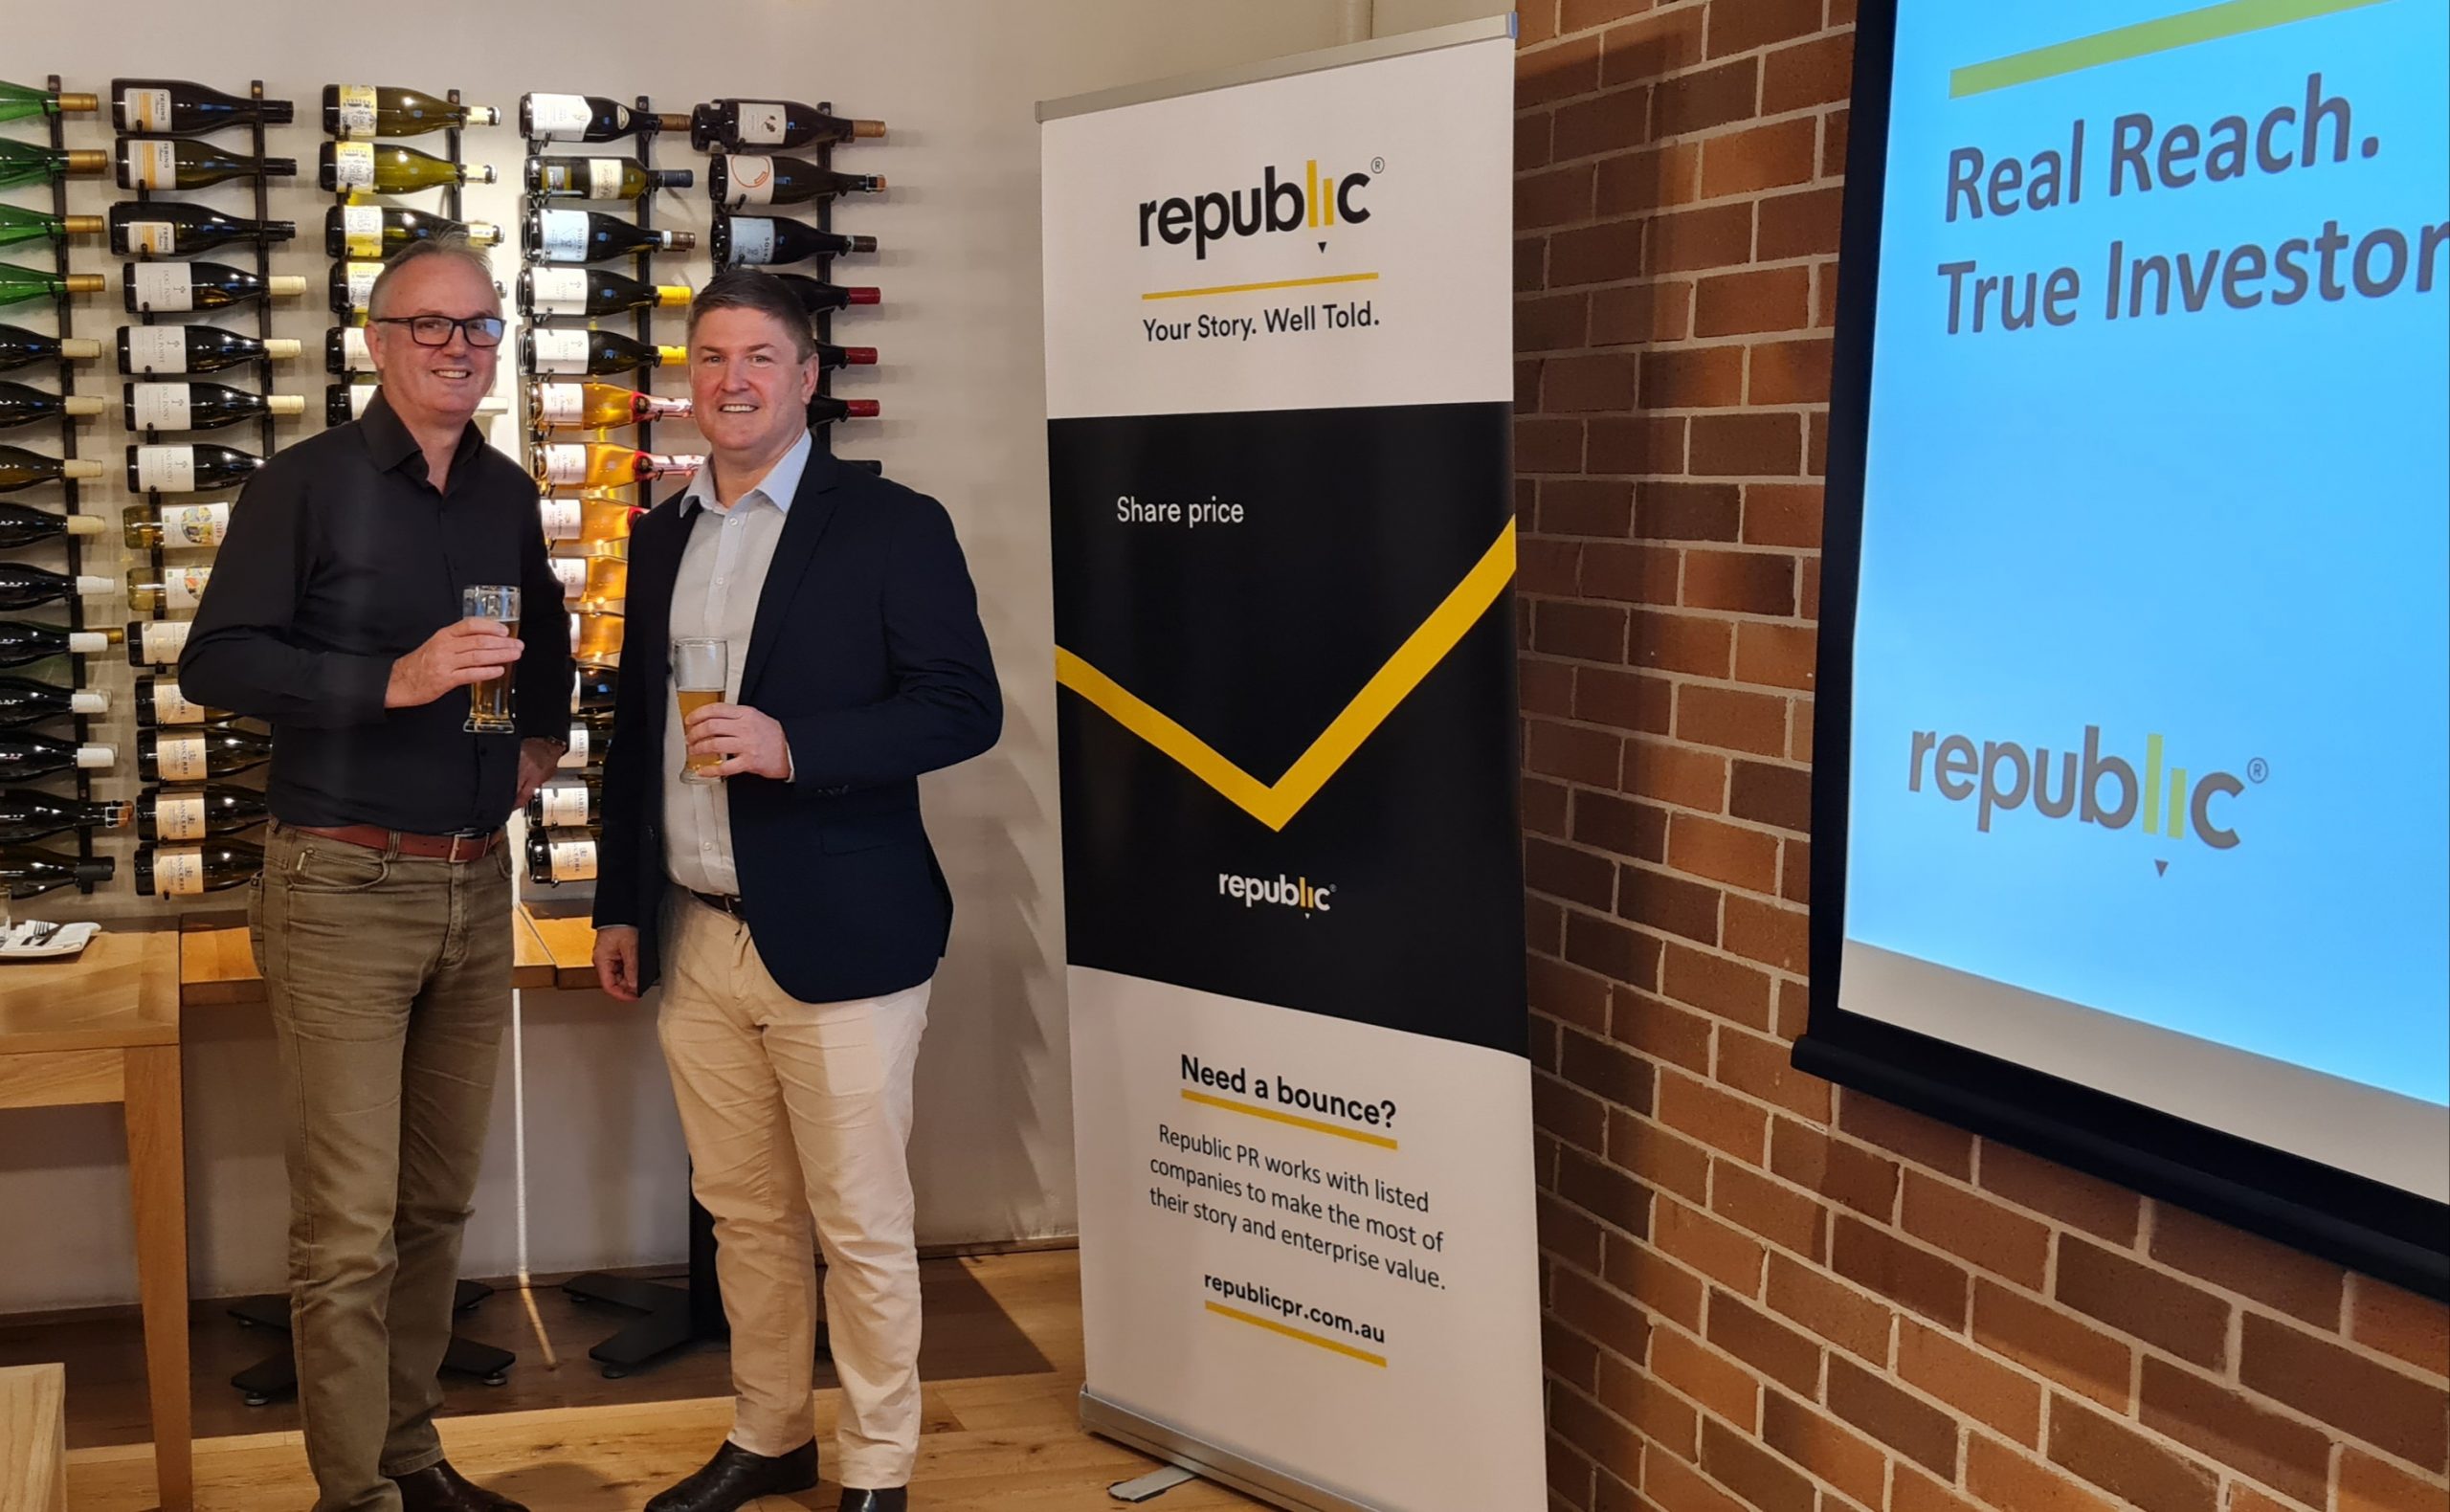 Great to be collaborating with Gareth Quinn at RepublicPR's launch of their partnership with ShareCafe - an online financial news channel dedicated to informing the public on the latest happenings and advice on listed companies.